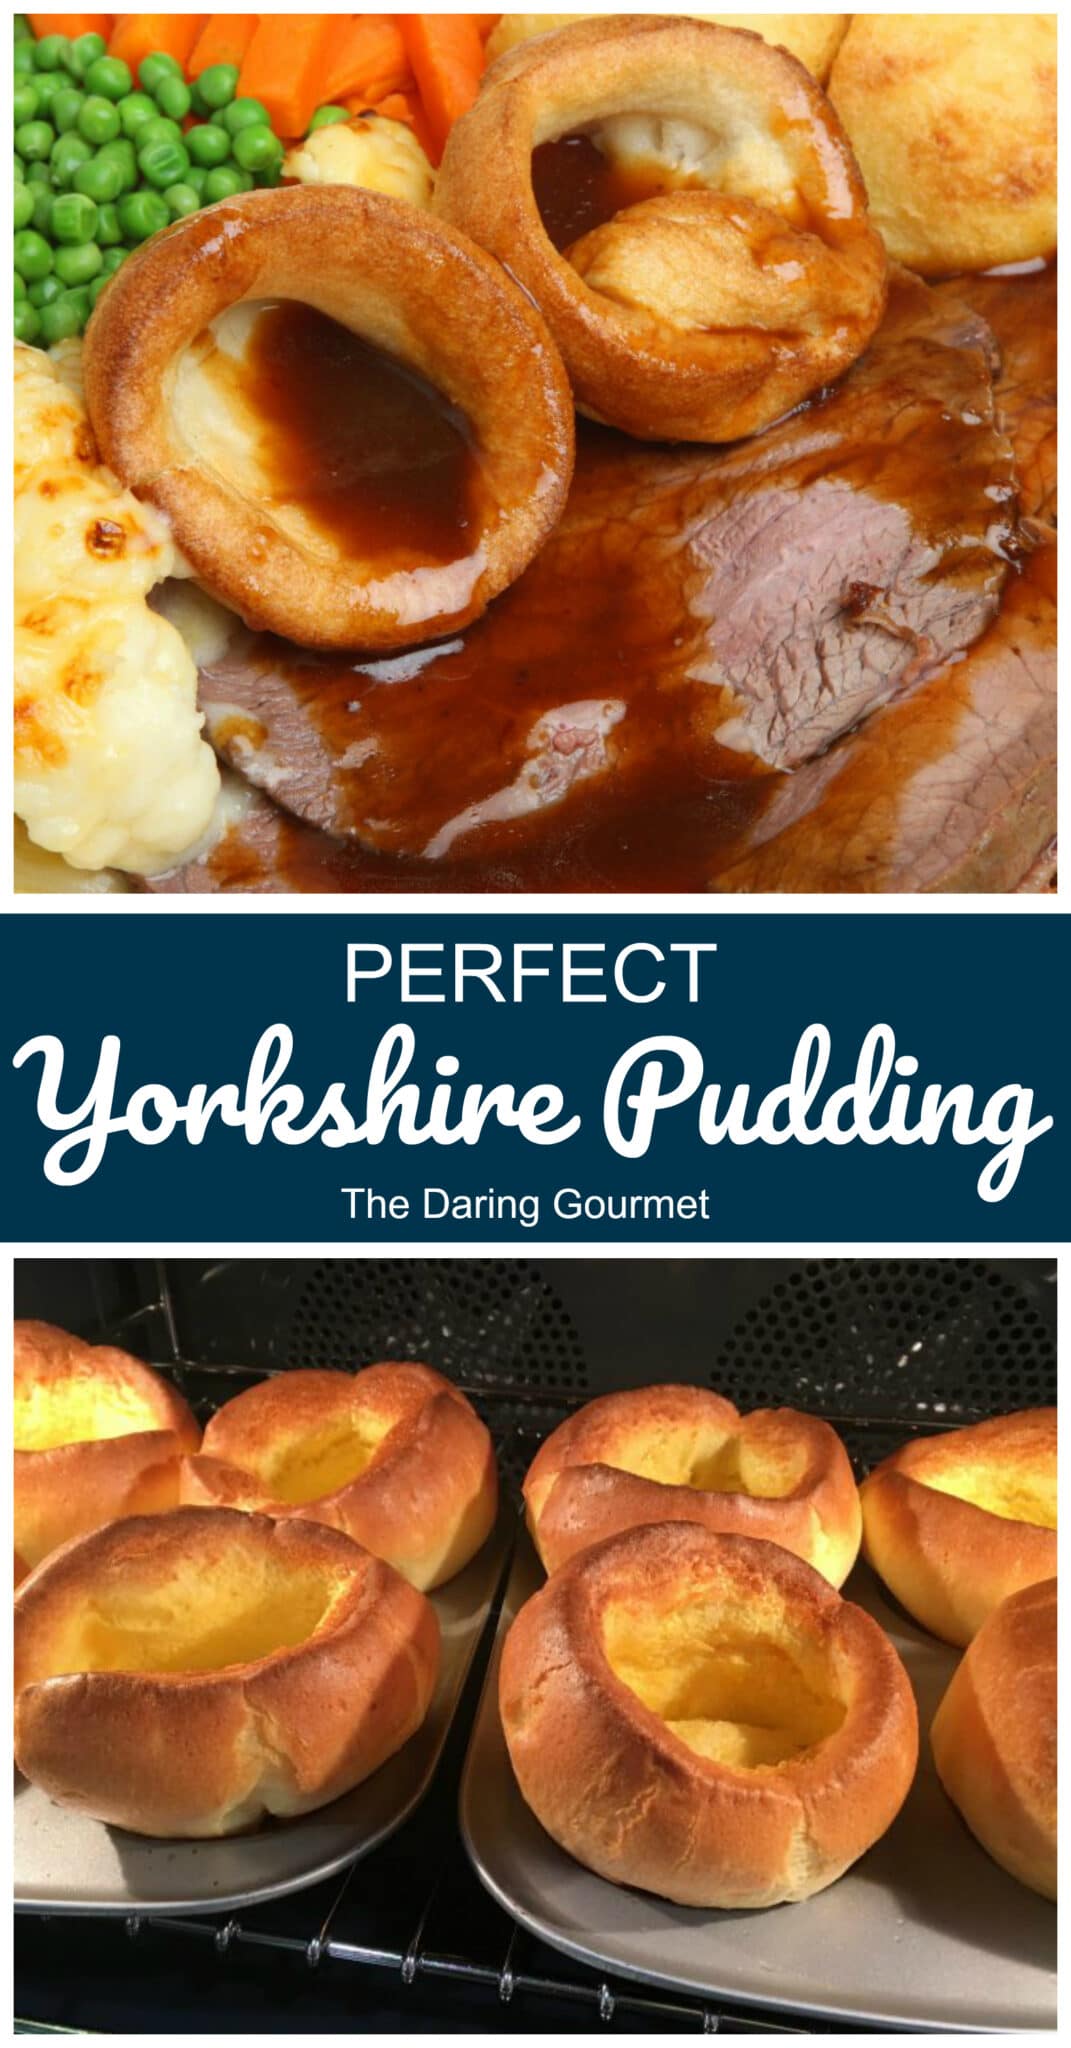 yorkshire pudding recipe how to make homemade best traditional authentic English British